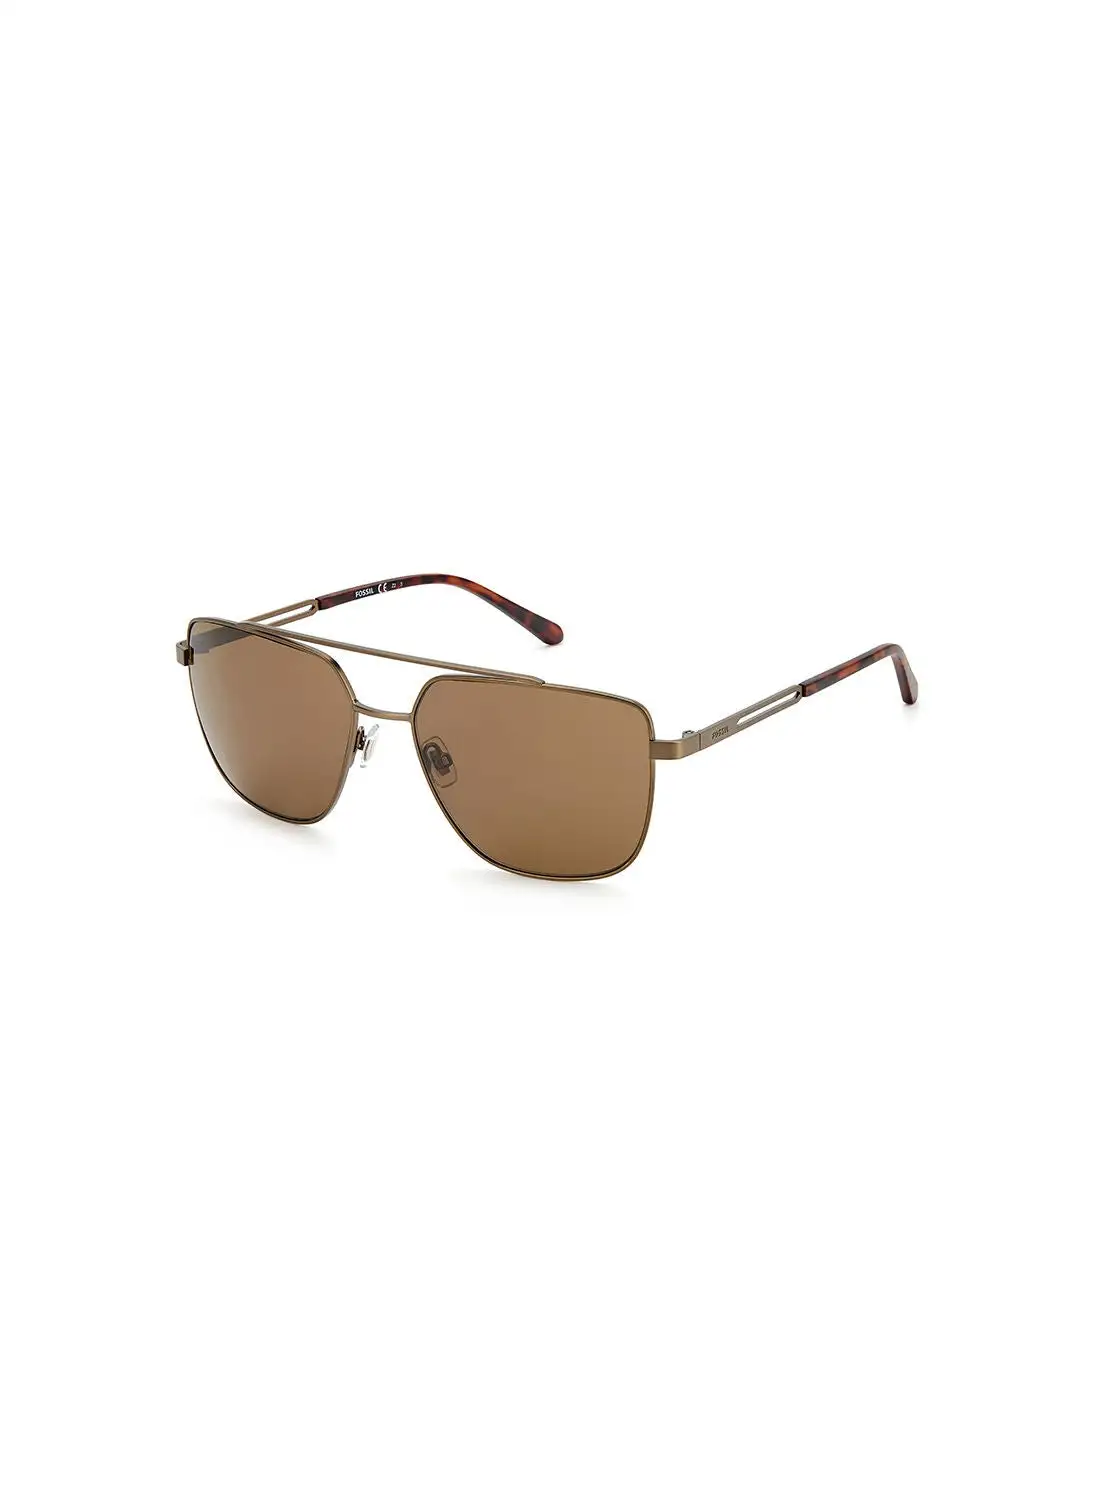 FOSSIL Men's UV Protection Square Sunglasses - Fos 3129/G/S Mttant Gd 59 - Lens Size: 59 Mm